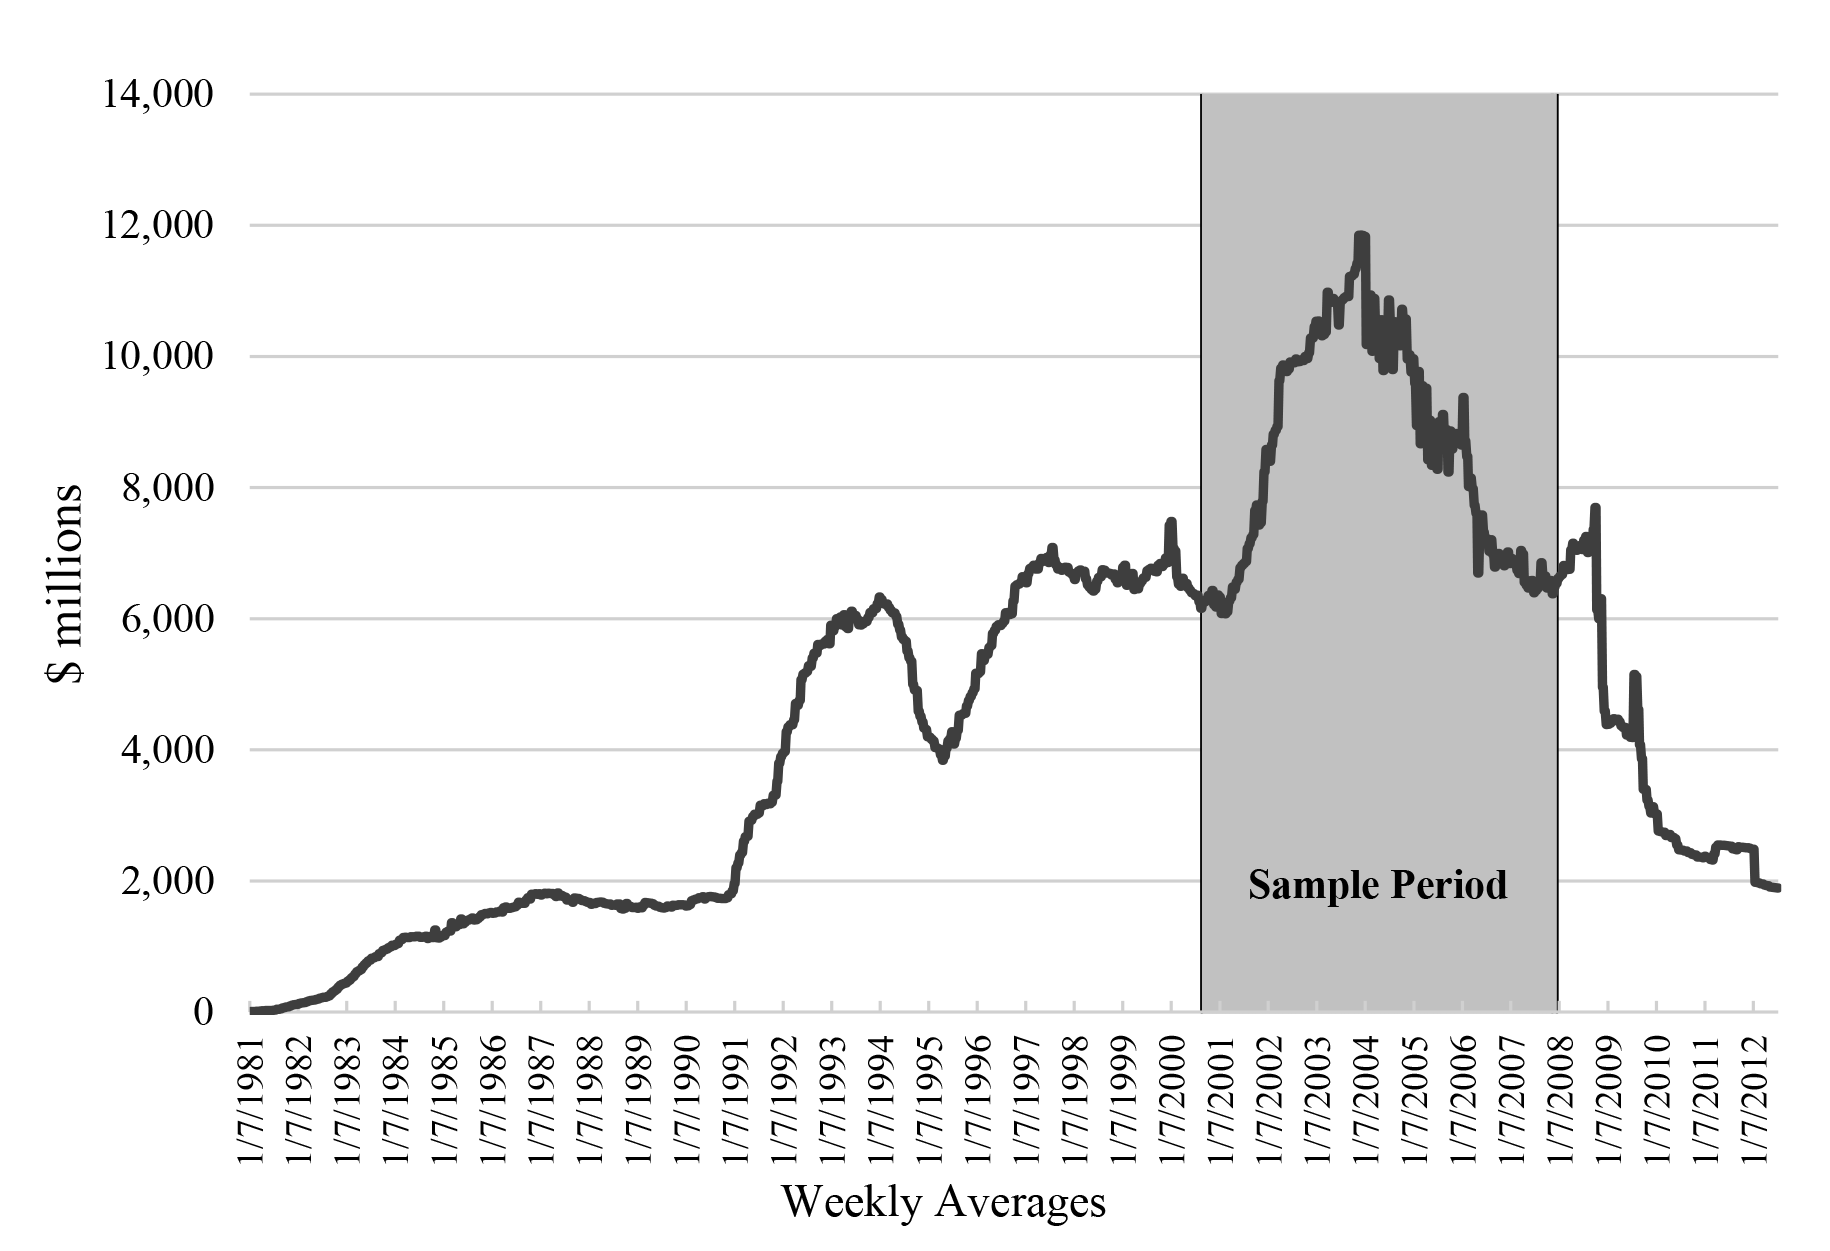 Figure 1: Aggregate Clearing Balances Weekly Averages from January 7, 1981, to July 11, 2012. See accessible link for data description.